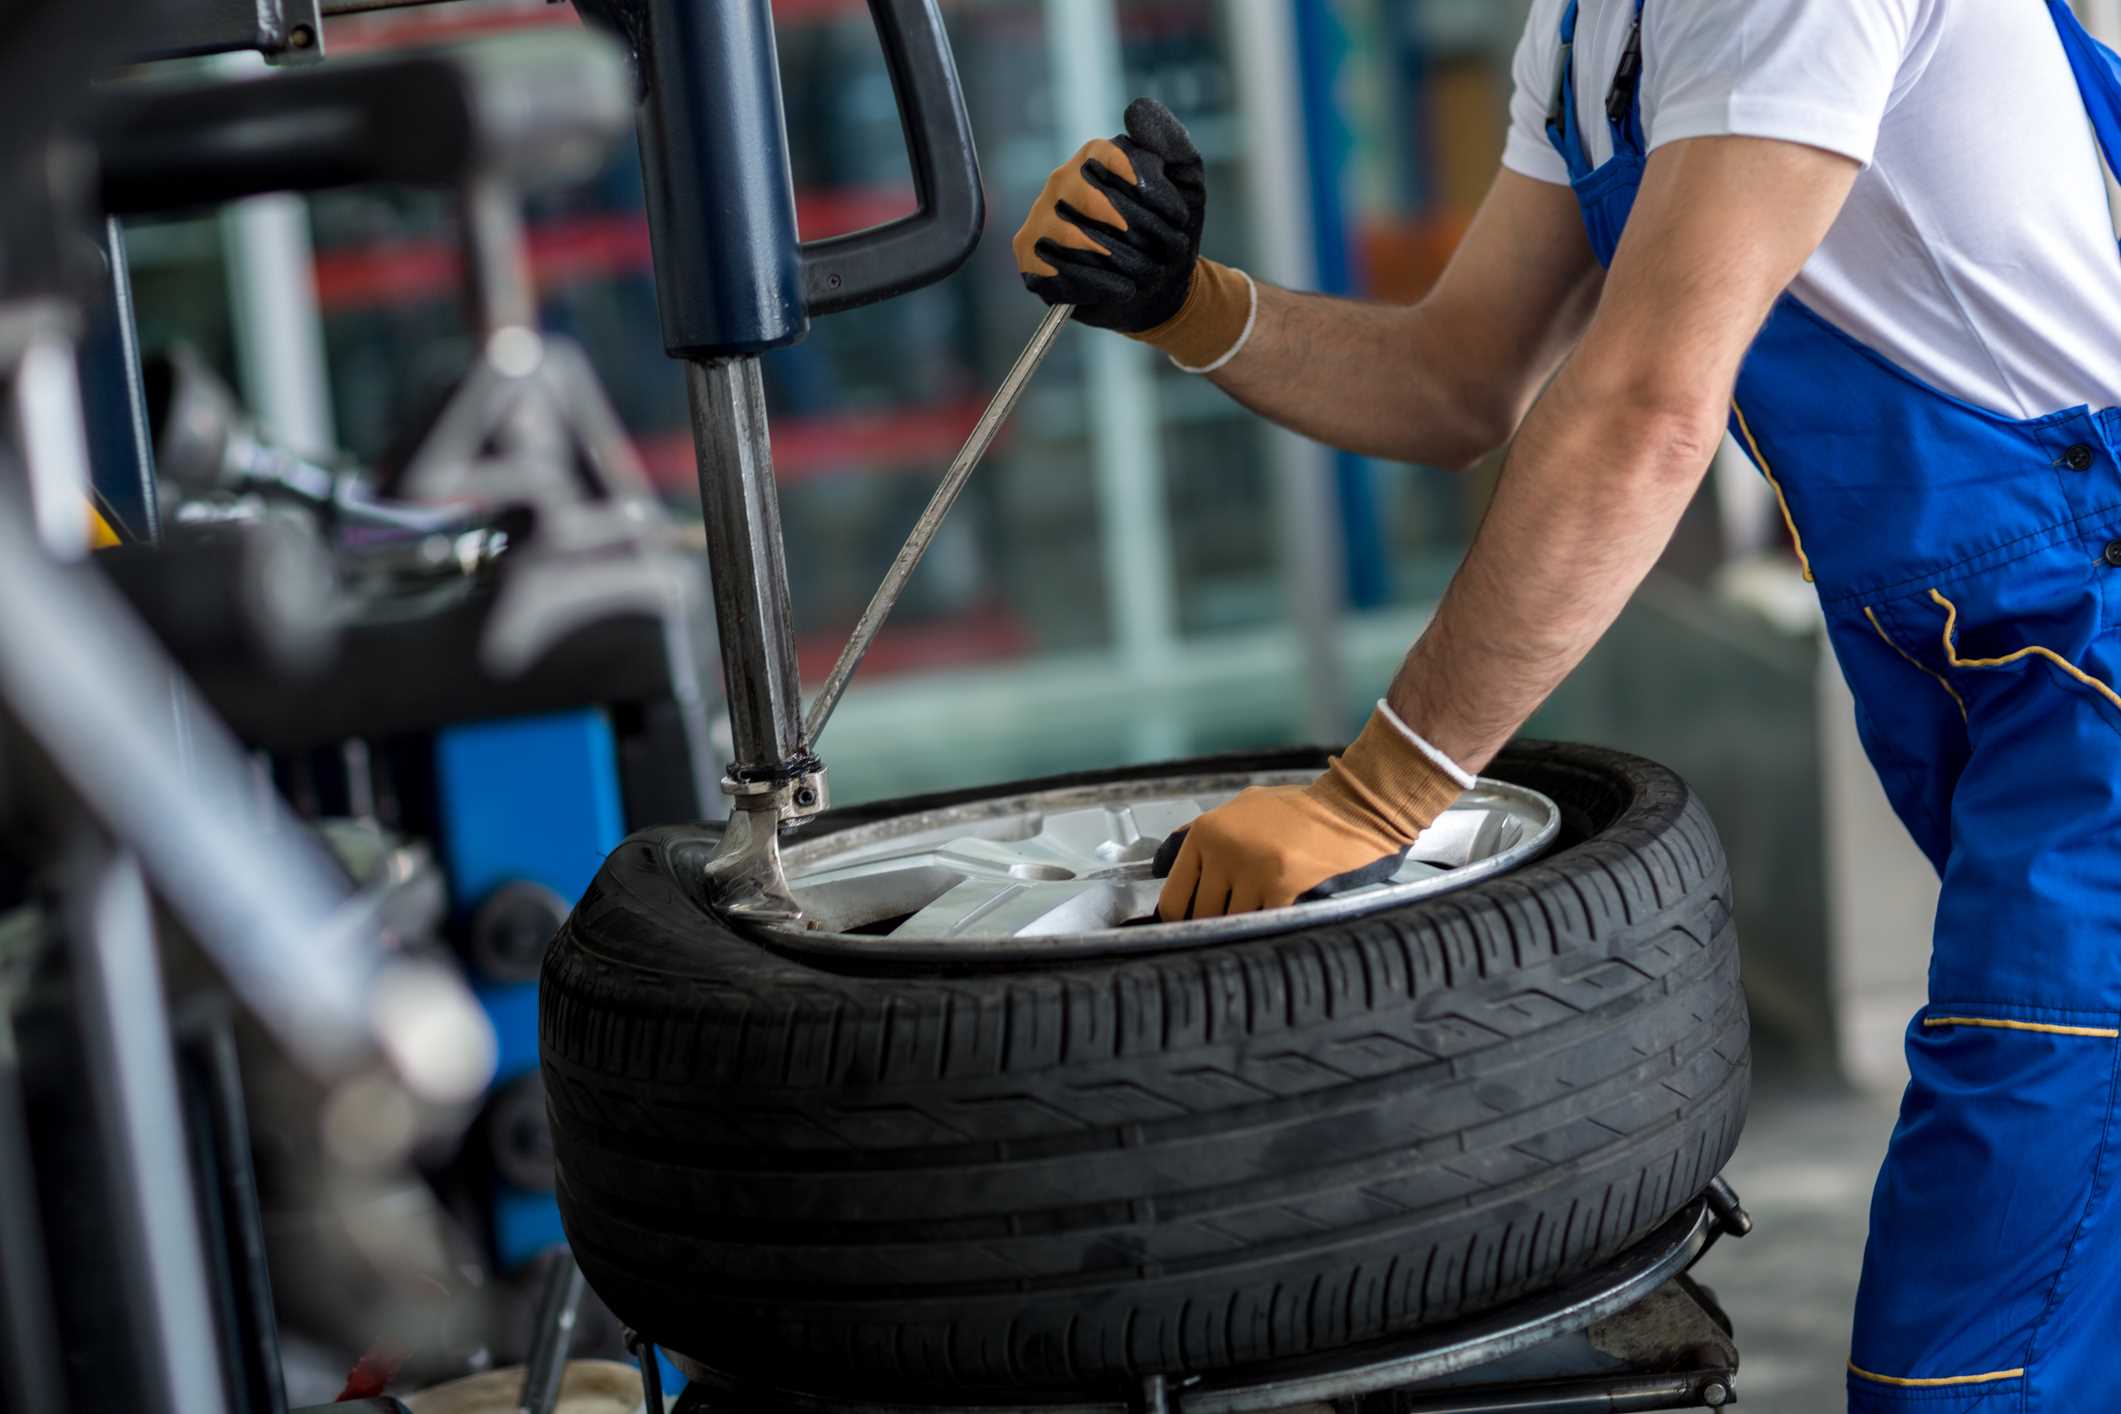 Tyre Replacement | Tyre Repairs | Wheel Alignment | Wheel Balancing | Puncture Repair | Tyre Safety Check | Downpatrick | County Down | Fastyre